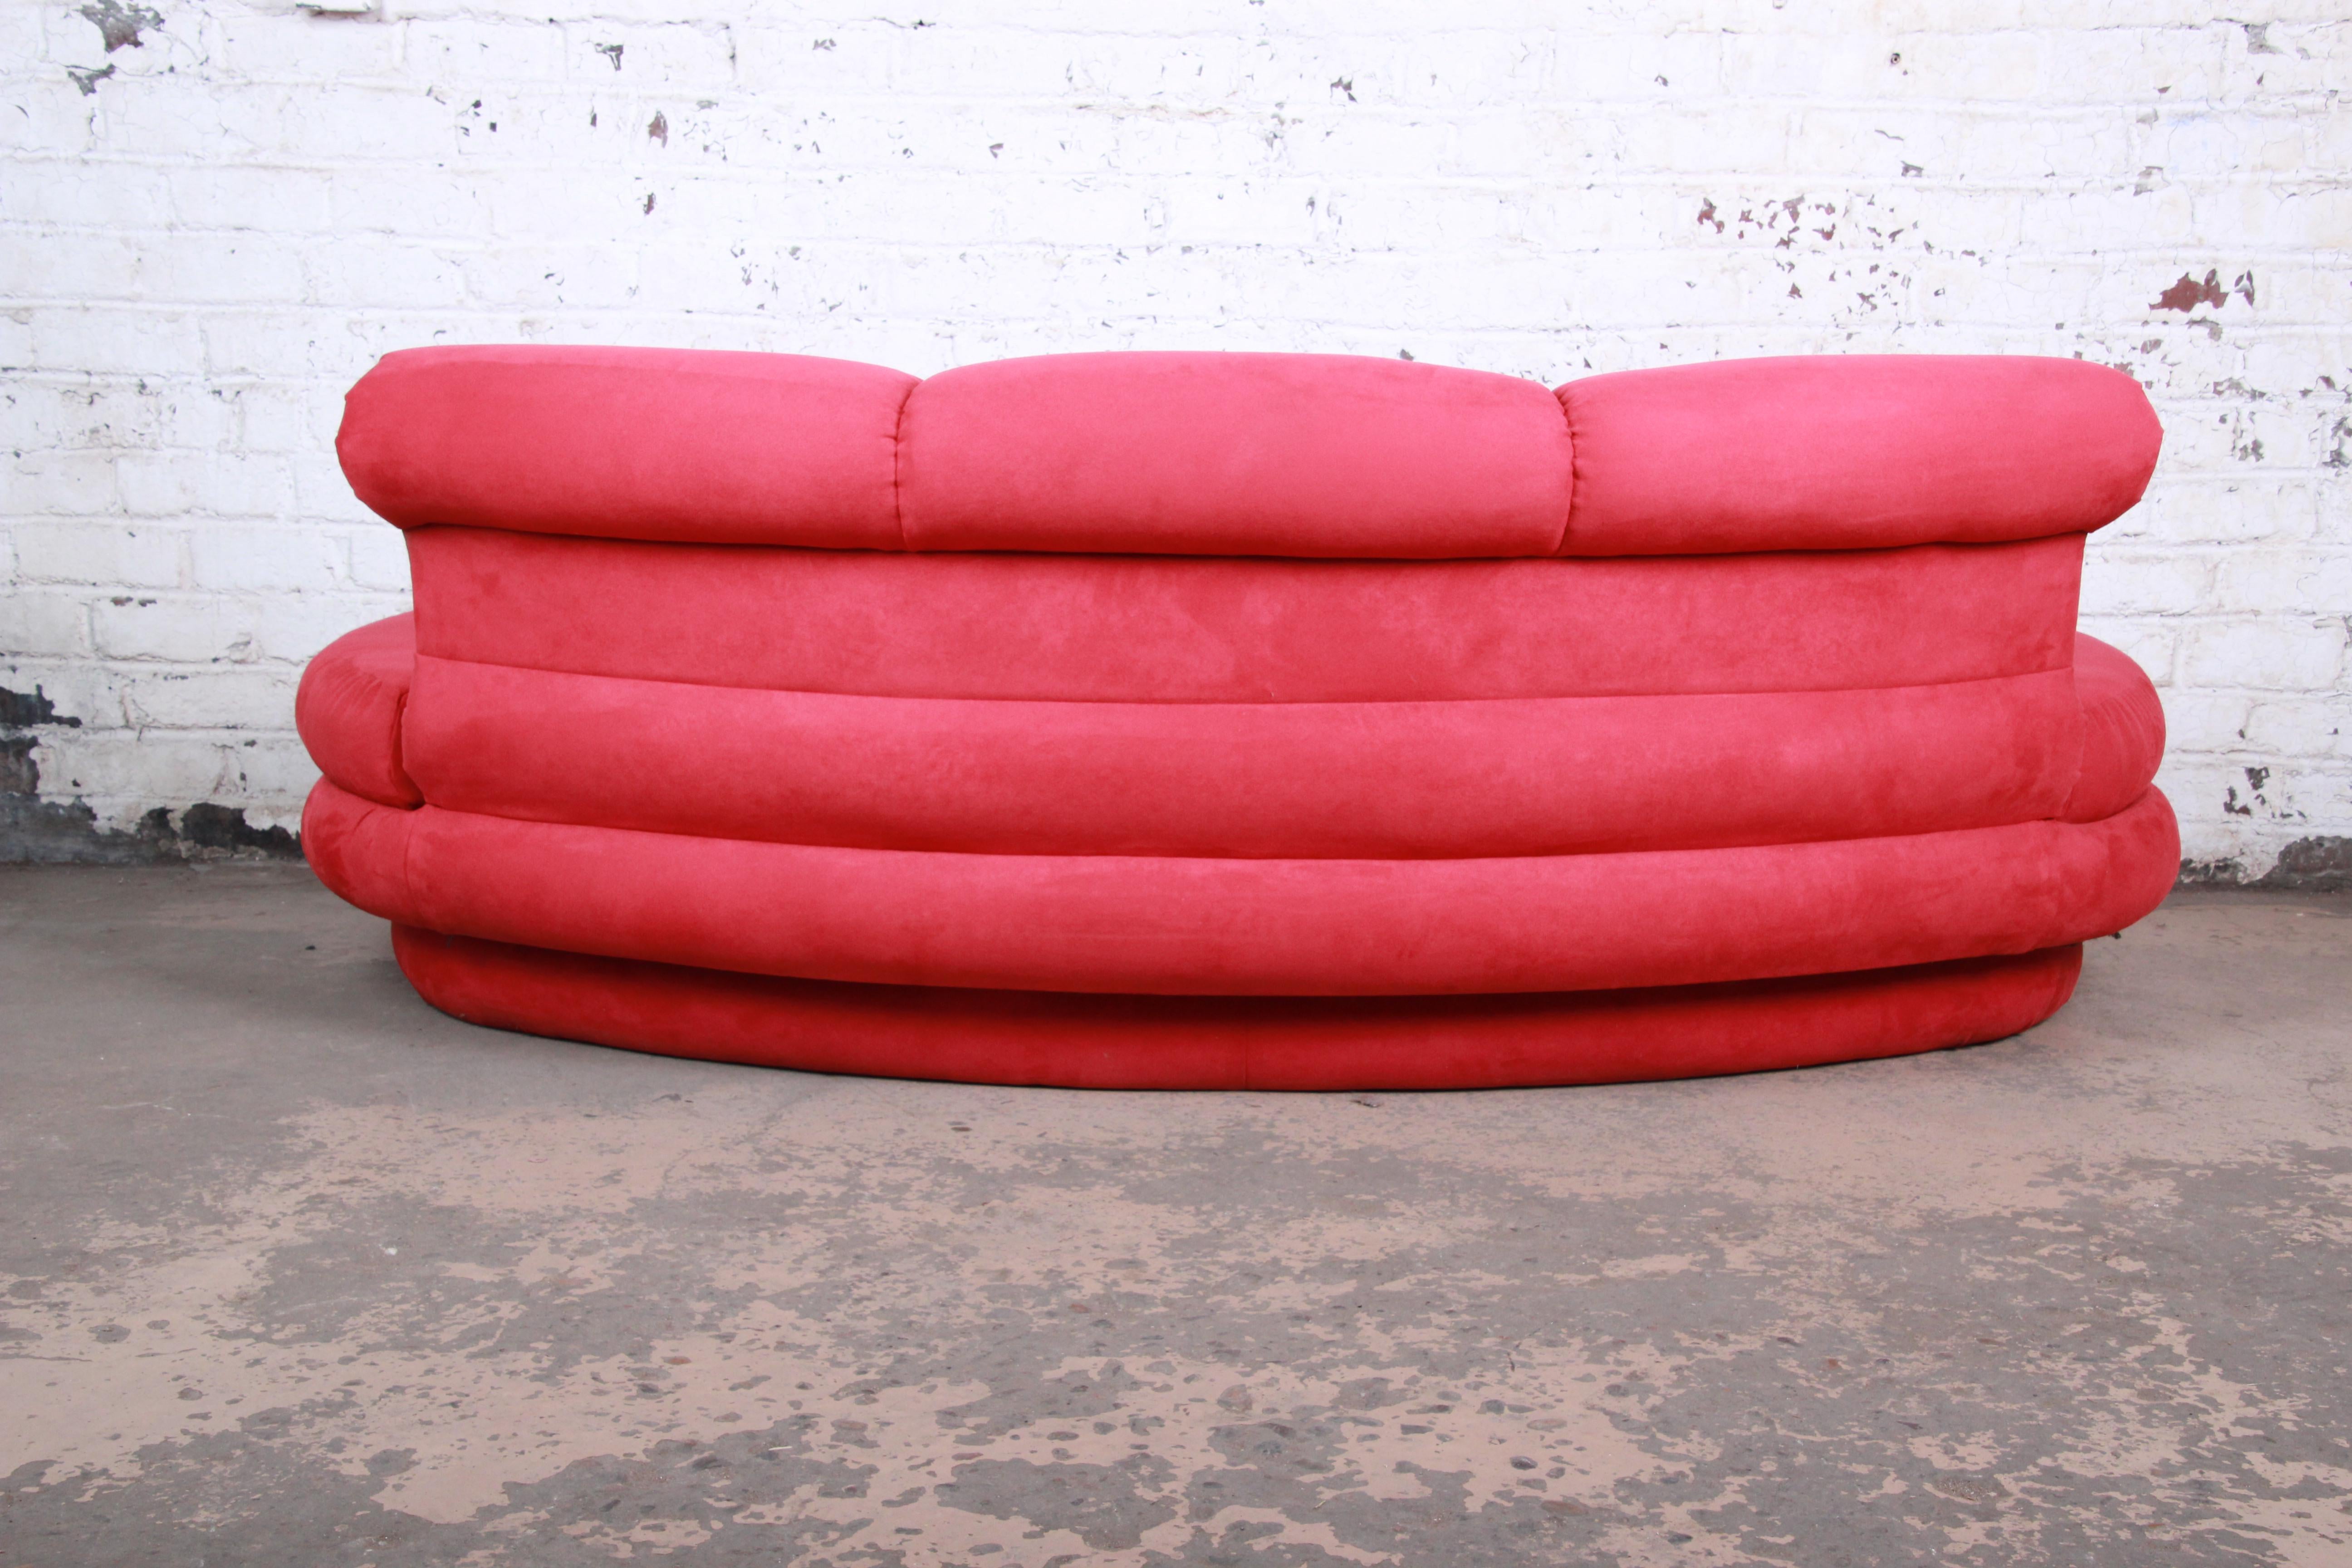 Late 20th Century Adrian Pearsall Curved Kidney Shape Sofa for Comfort Designs